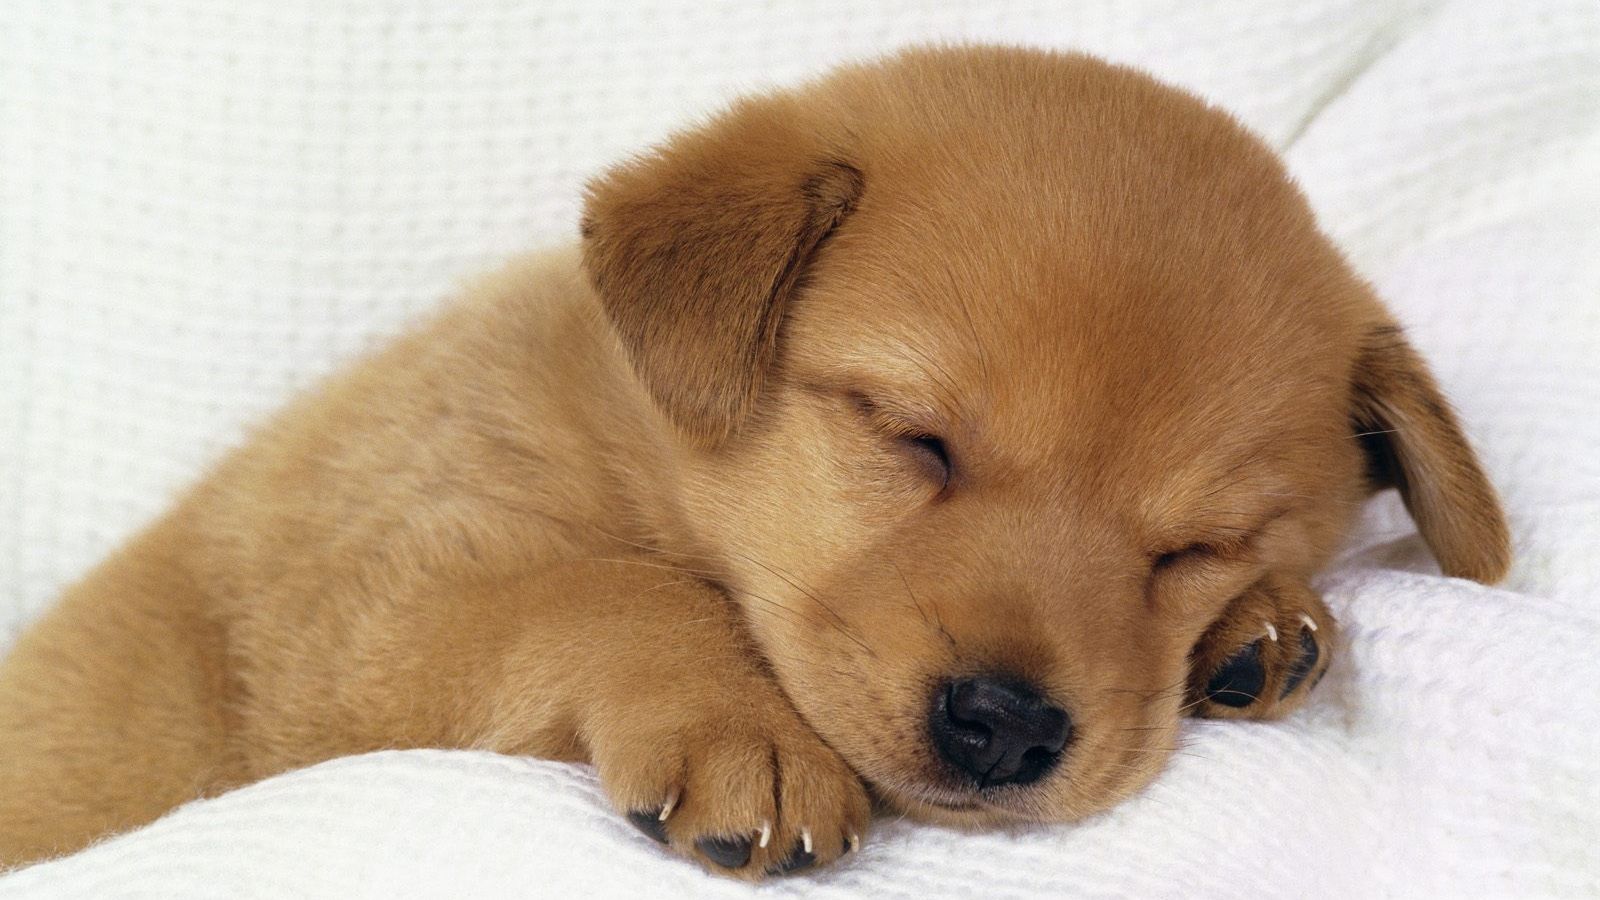 Free download Little Puppy background cute puppy wallpaper funny